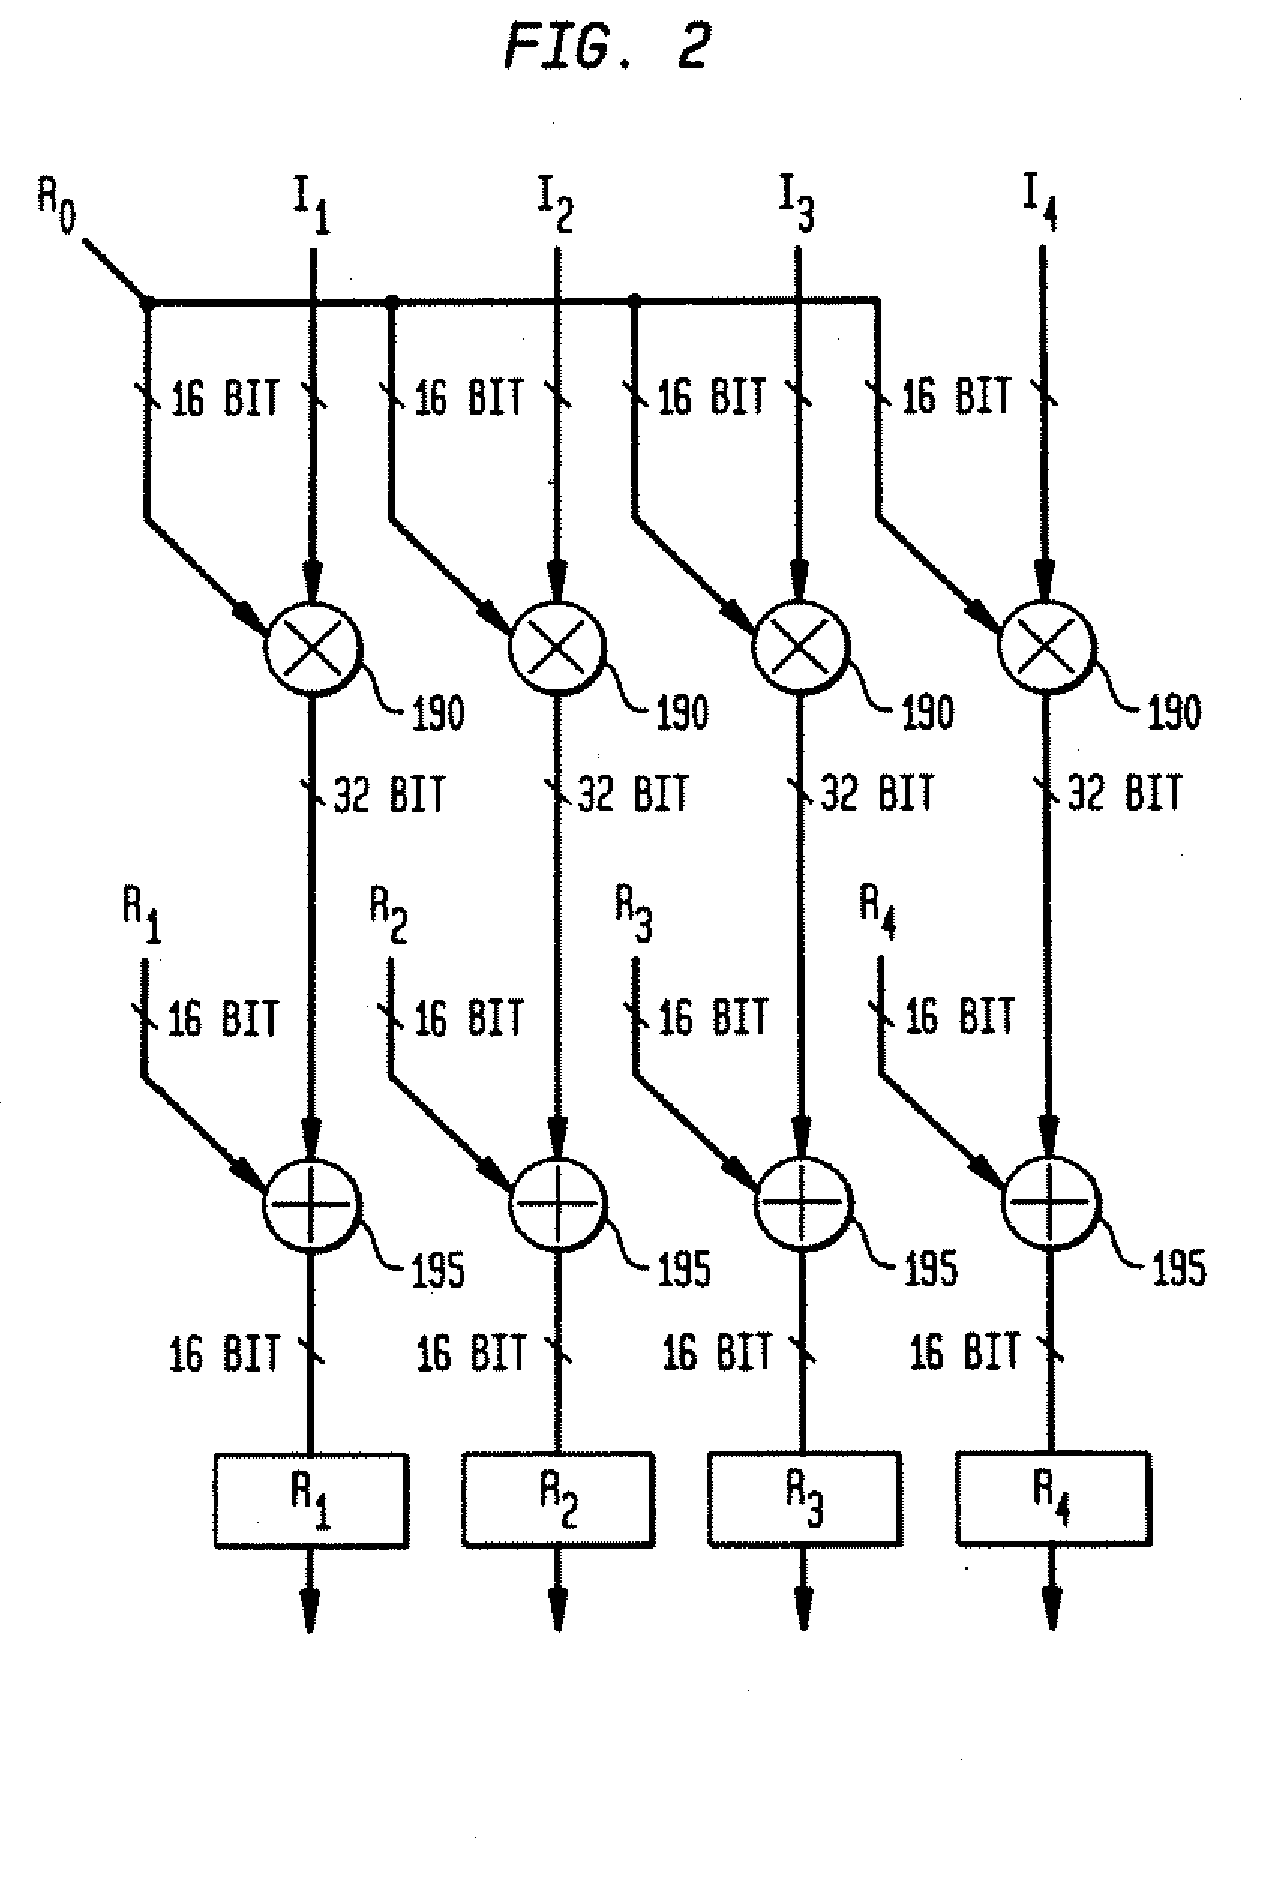 Method and system for managing hardware resources to implement system functions using an adaptive computing architecture